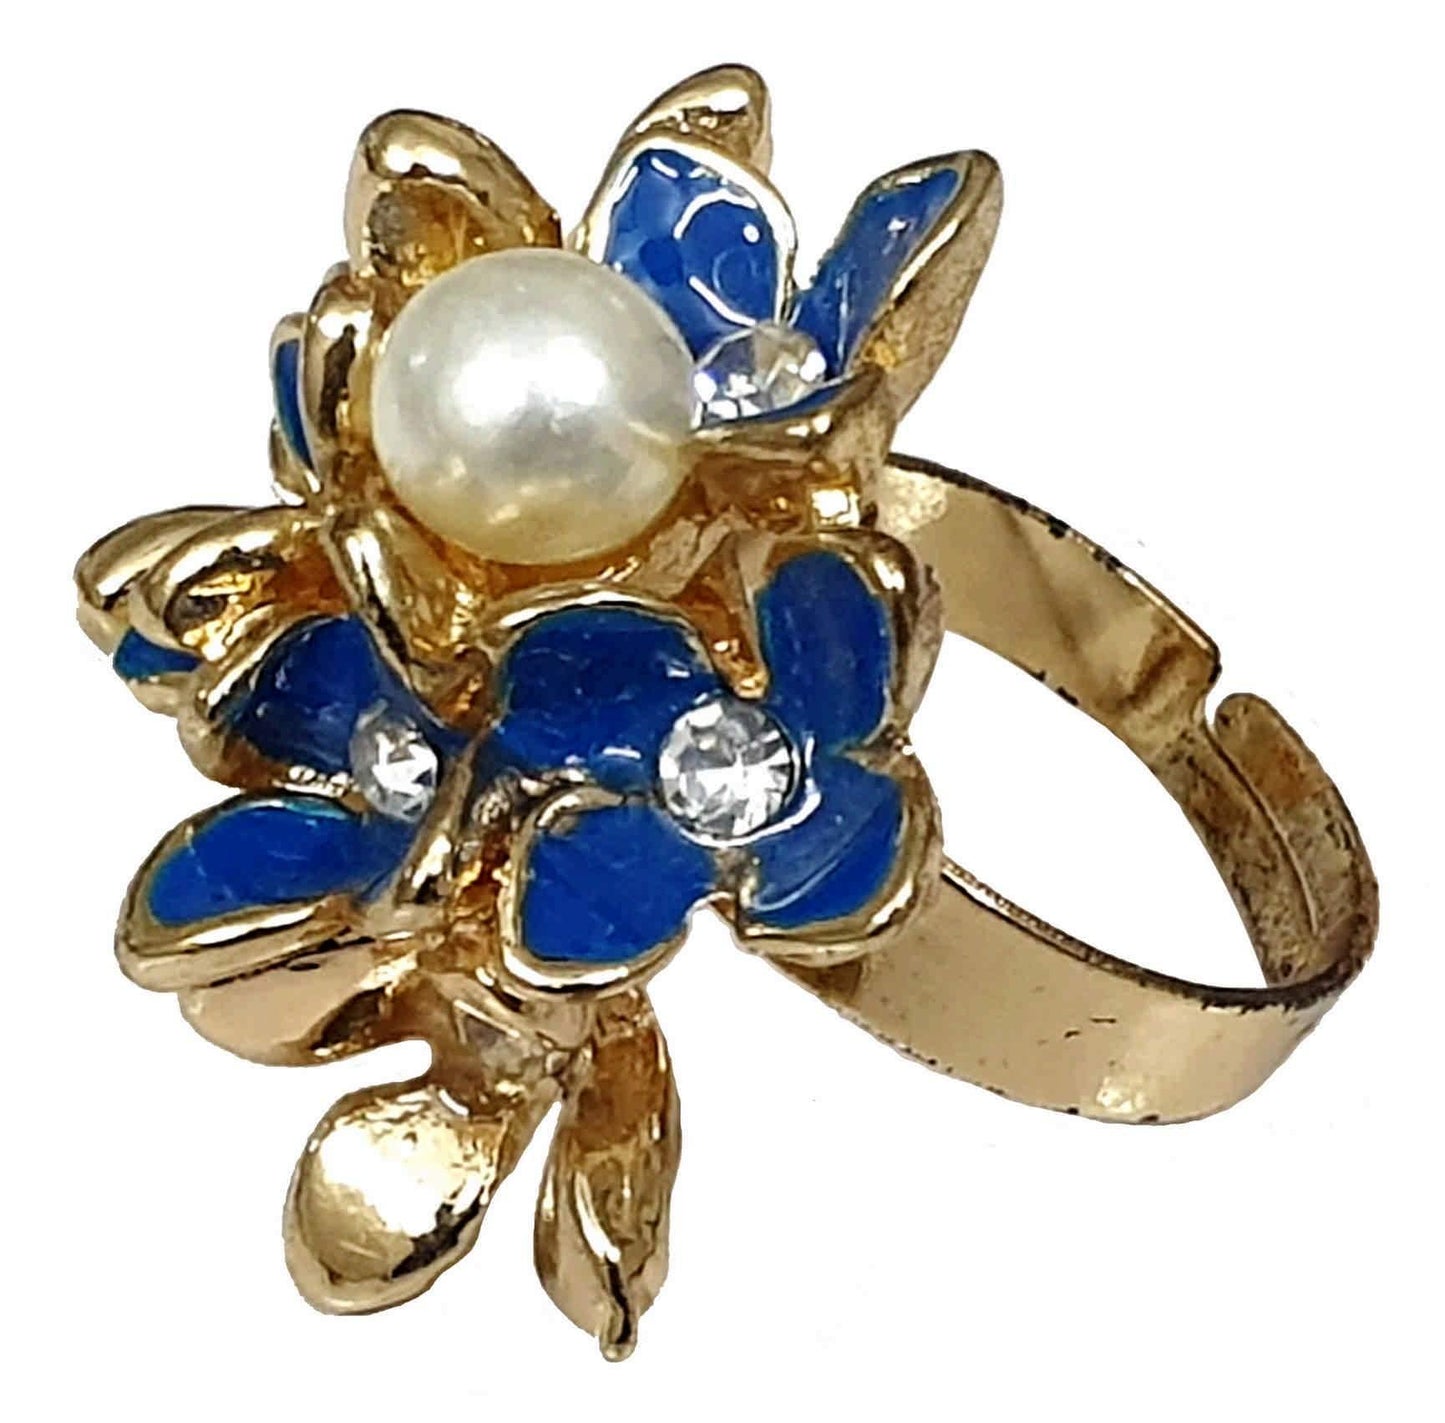 Indian Petals Rhinestones and Pearls Studded Floral Design Enamel Imitation Artificial Metal Polished Ring for Girls - Indian Petals